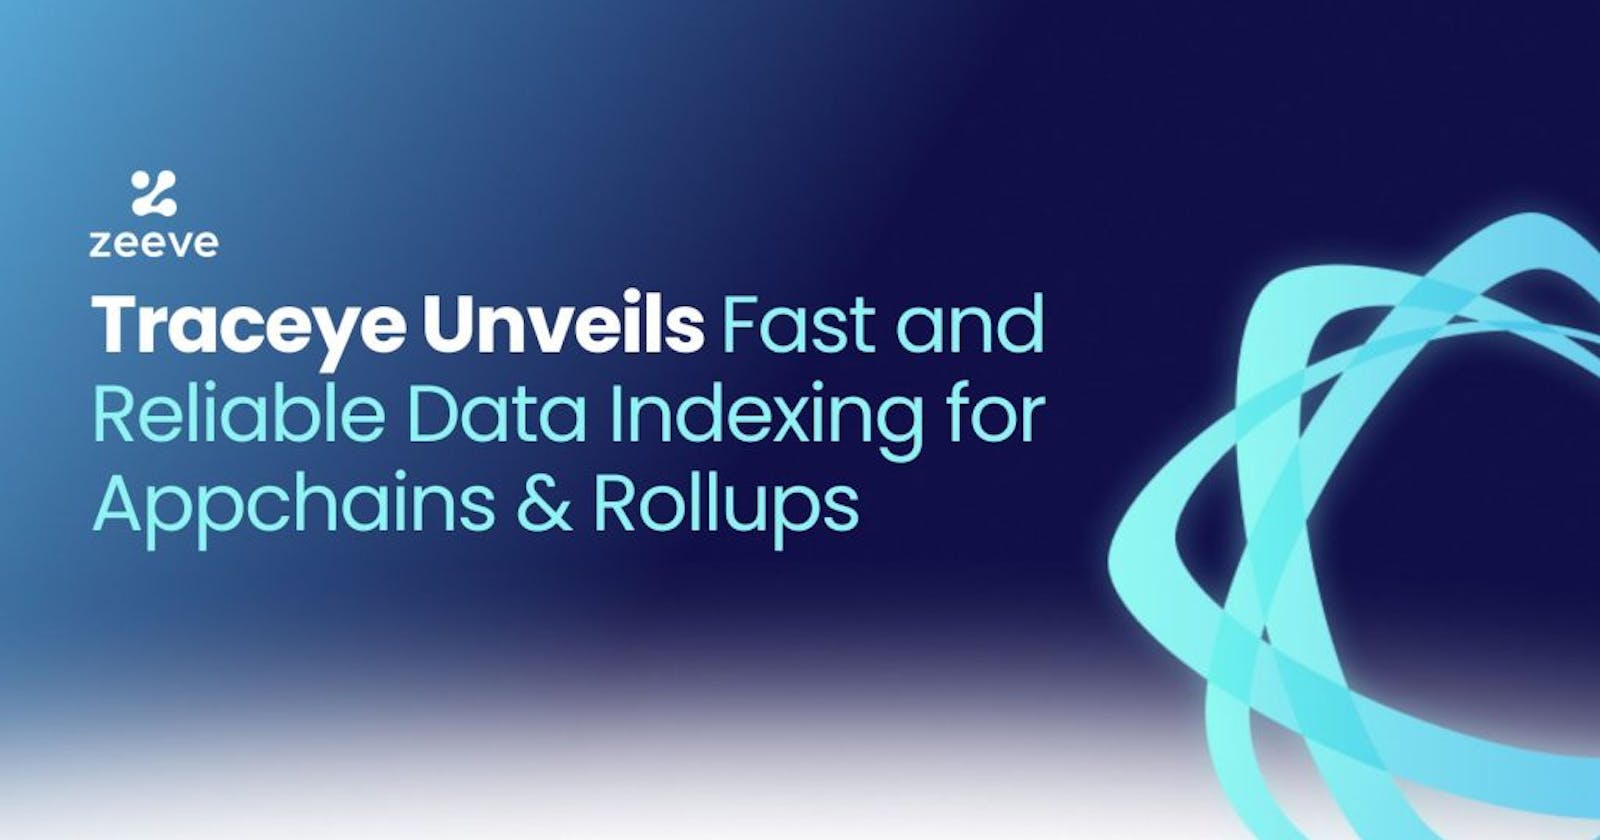 Traceye Unveils Fast and Reliable Data Indexing for Appchains & Rollups